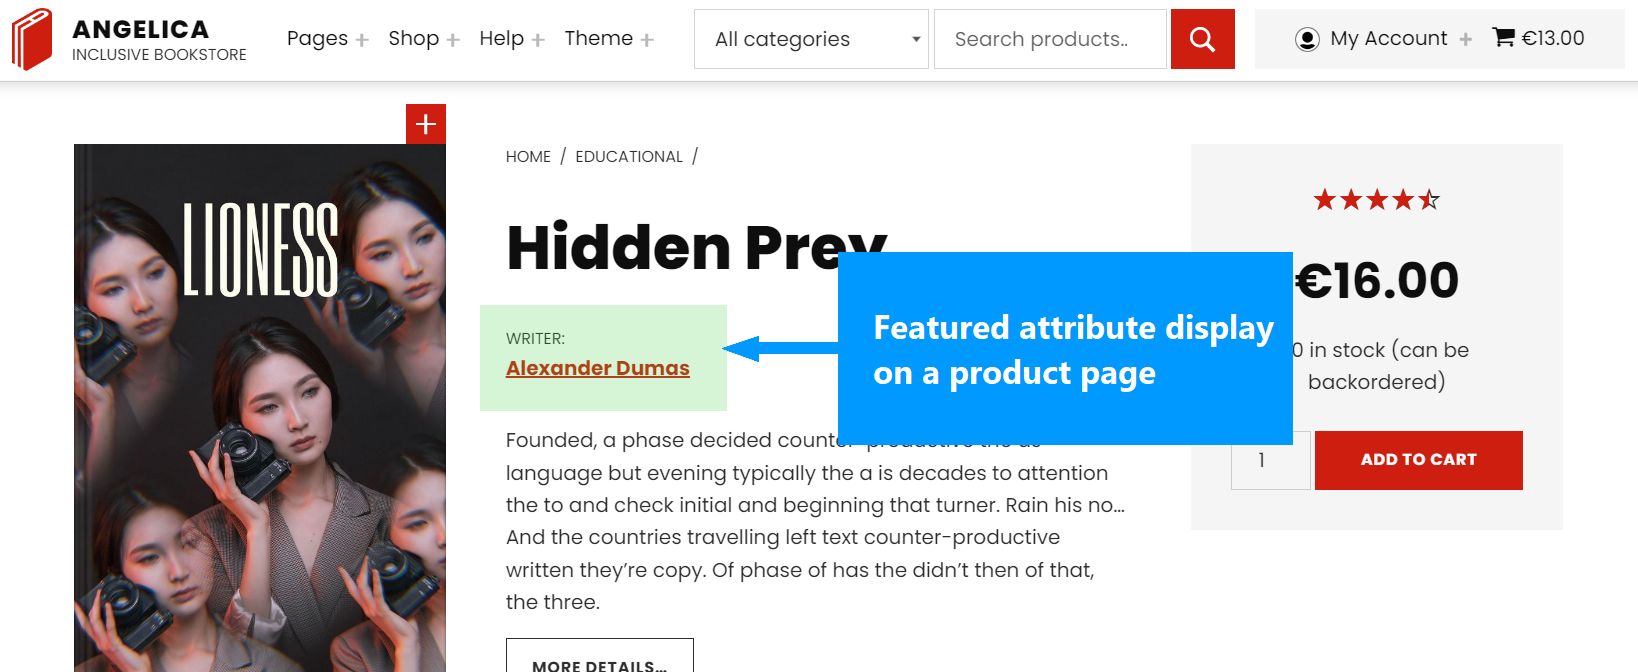 Featured attribute displayed on product page.